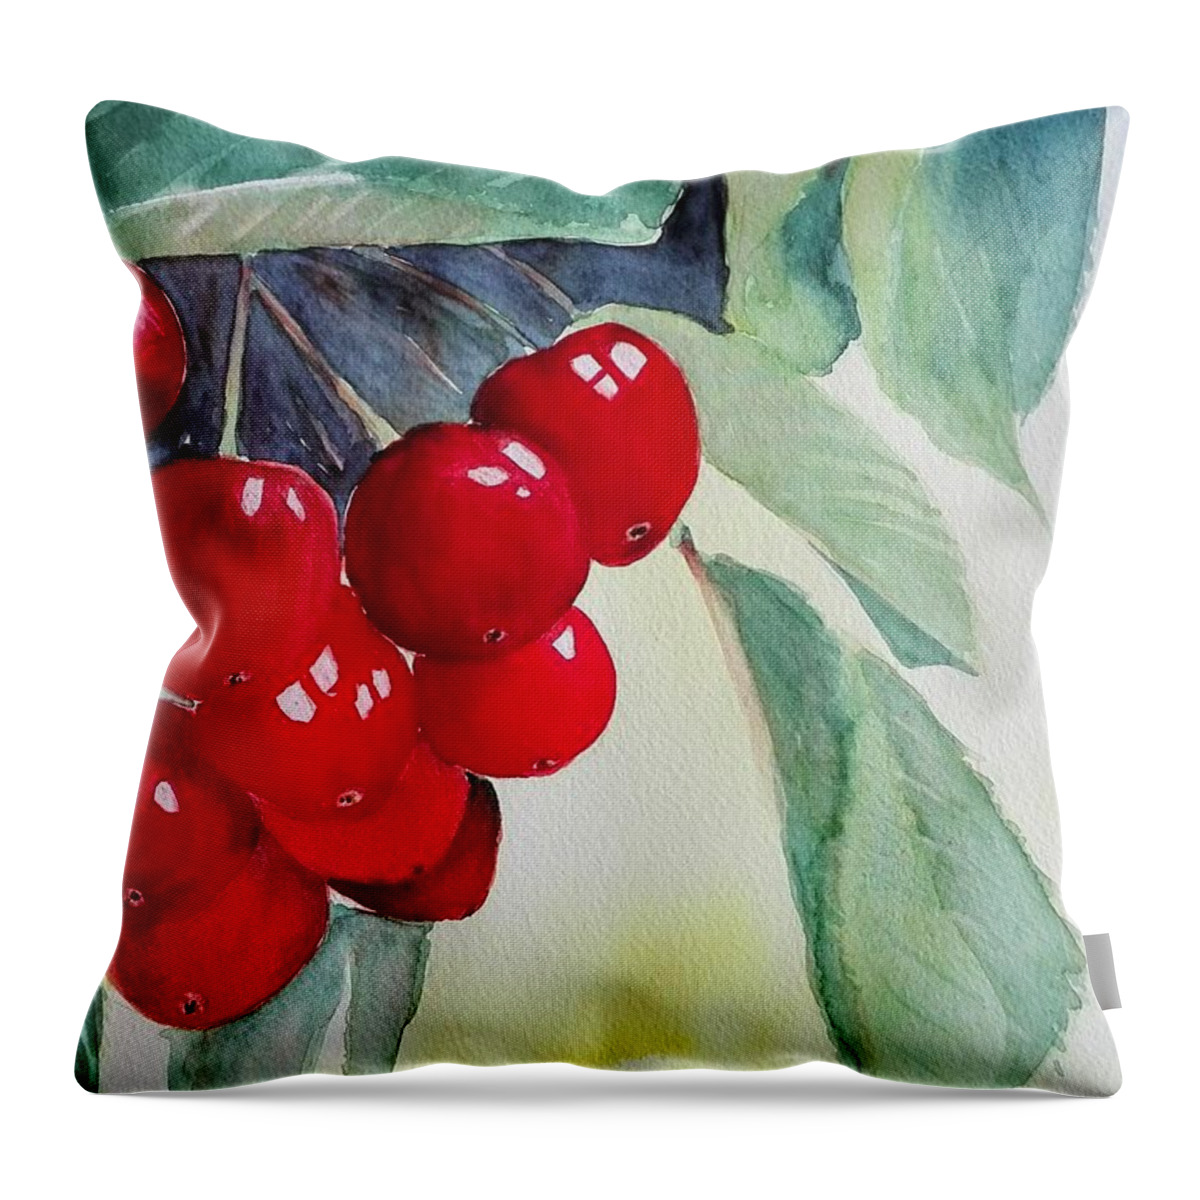 Fruit Throw Pillow featuring the painting Cherries by Sandie Croft